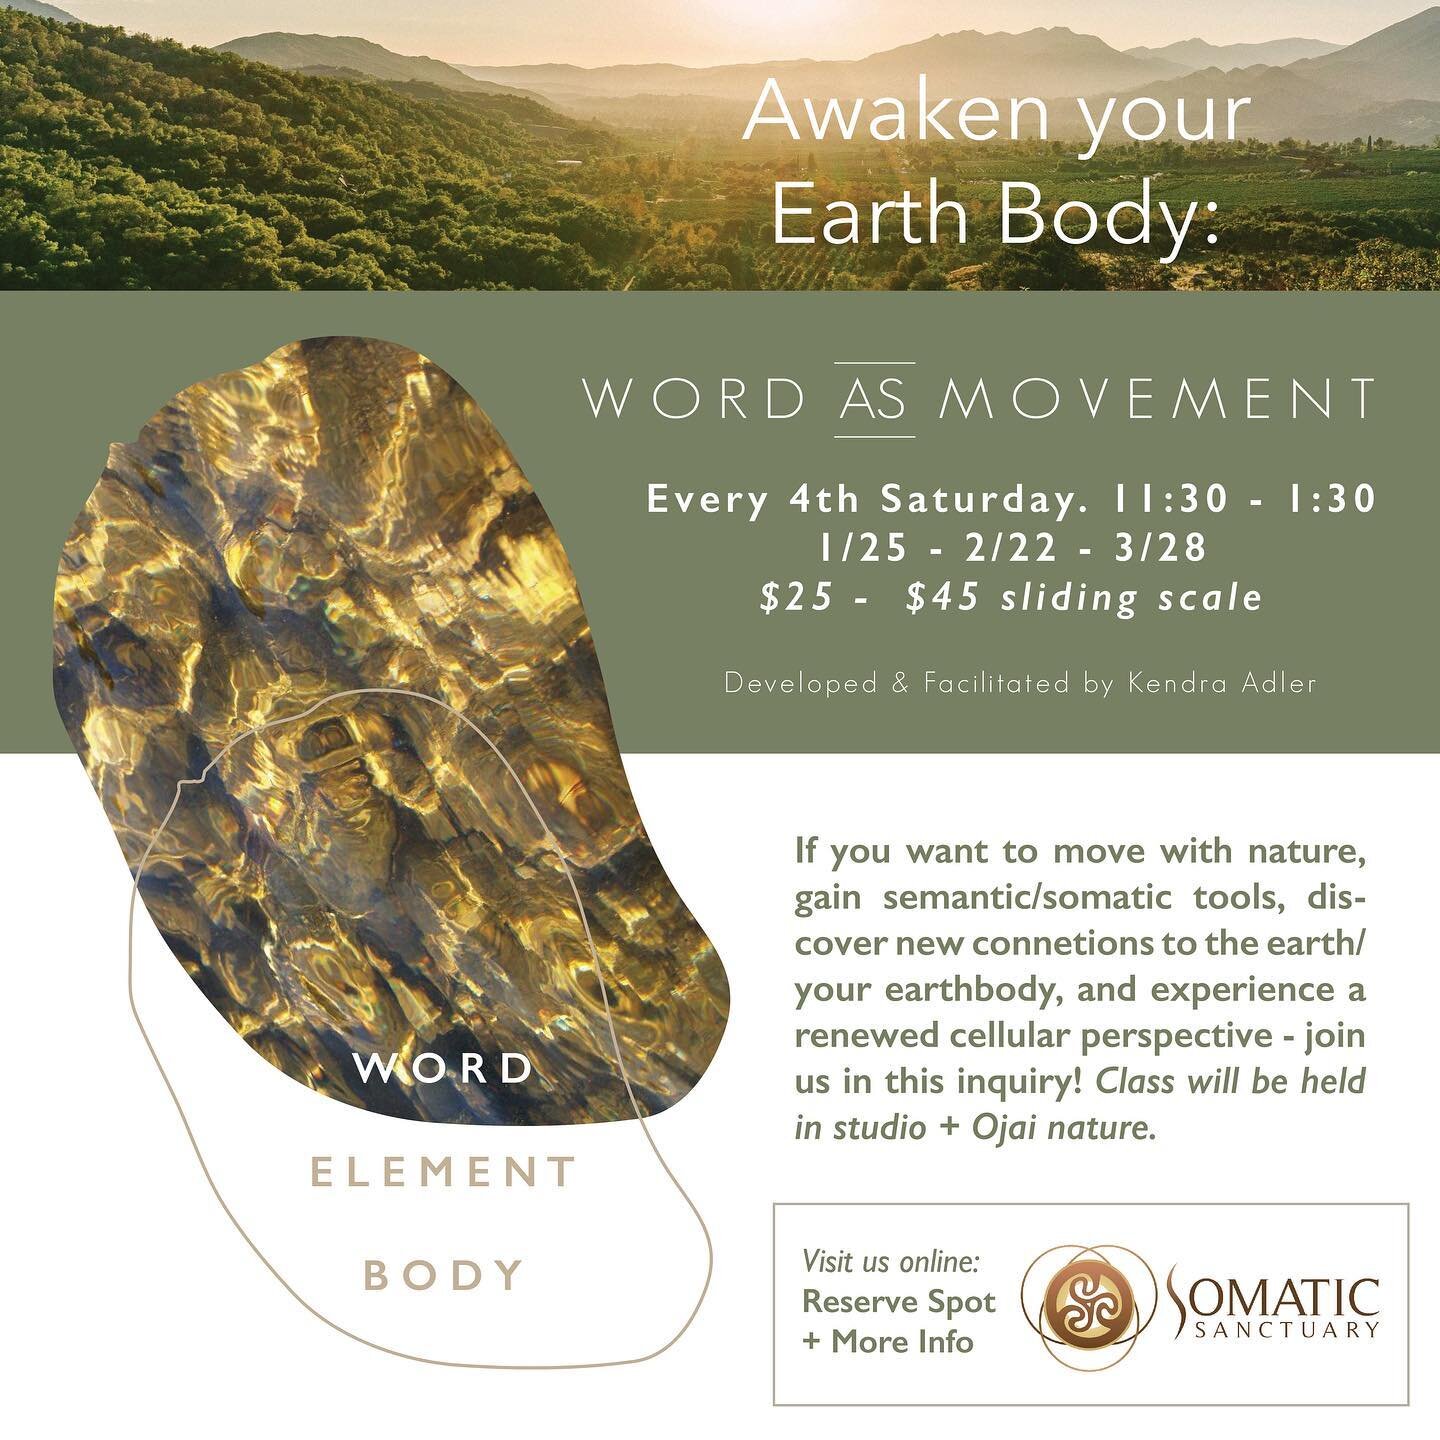 This Saturday, on the Lunar New Year - New Moon 1/25, the nature of Ojai will support our inquiry! We will gather together, investigating our body intelligence - as we uncover this new community, exploring Genius + Ecology
Let us move together - to s